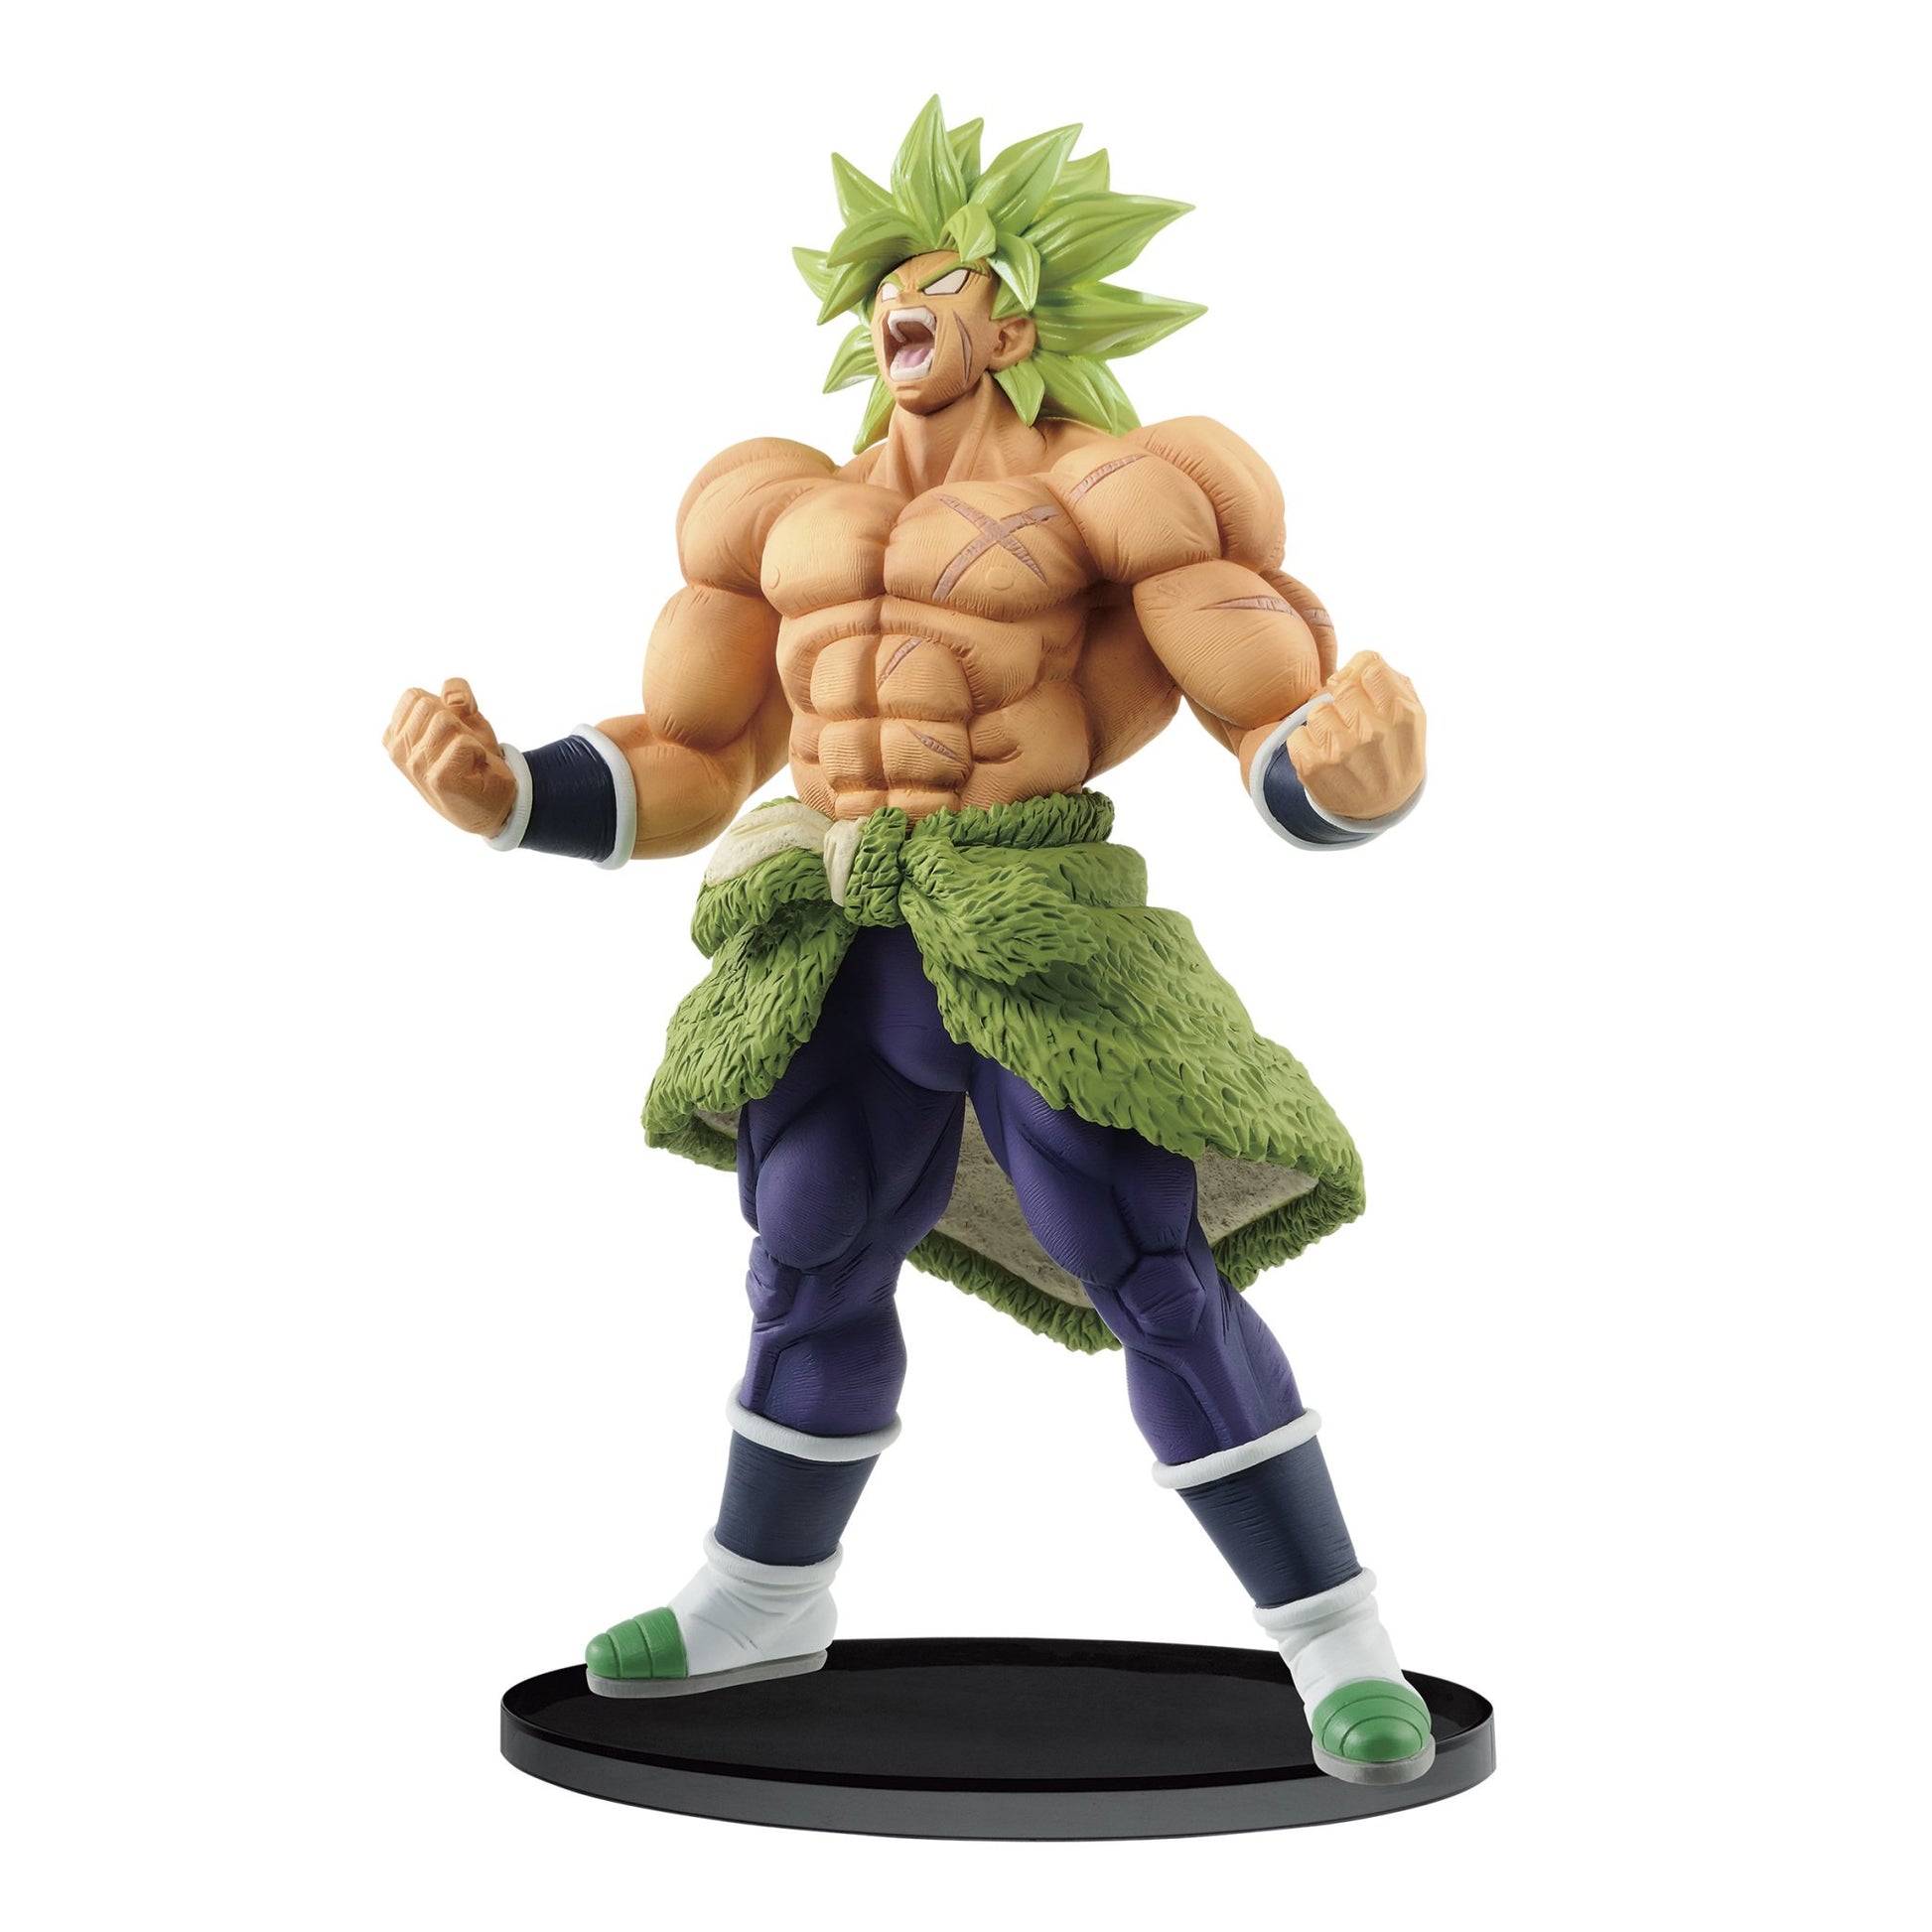 Dragon Ball Super BWFC 2 Champion Special Broly Figure - Super Anime Store FREE SHIPPING FAST SHIPPING USA